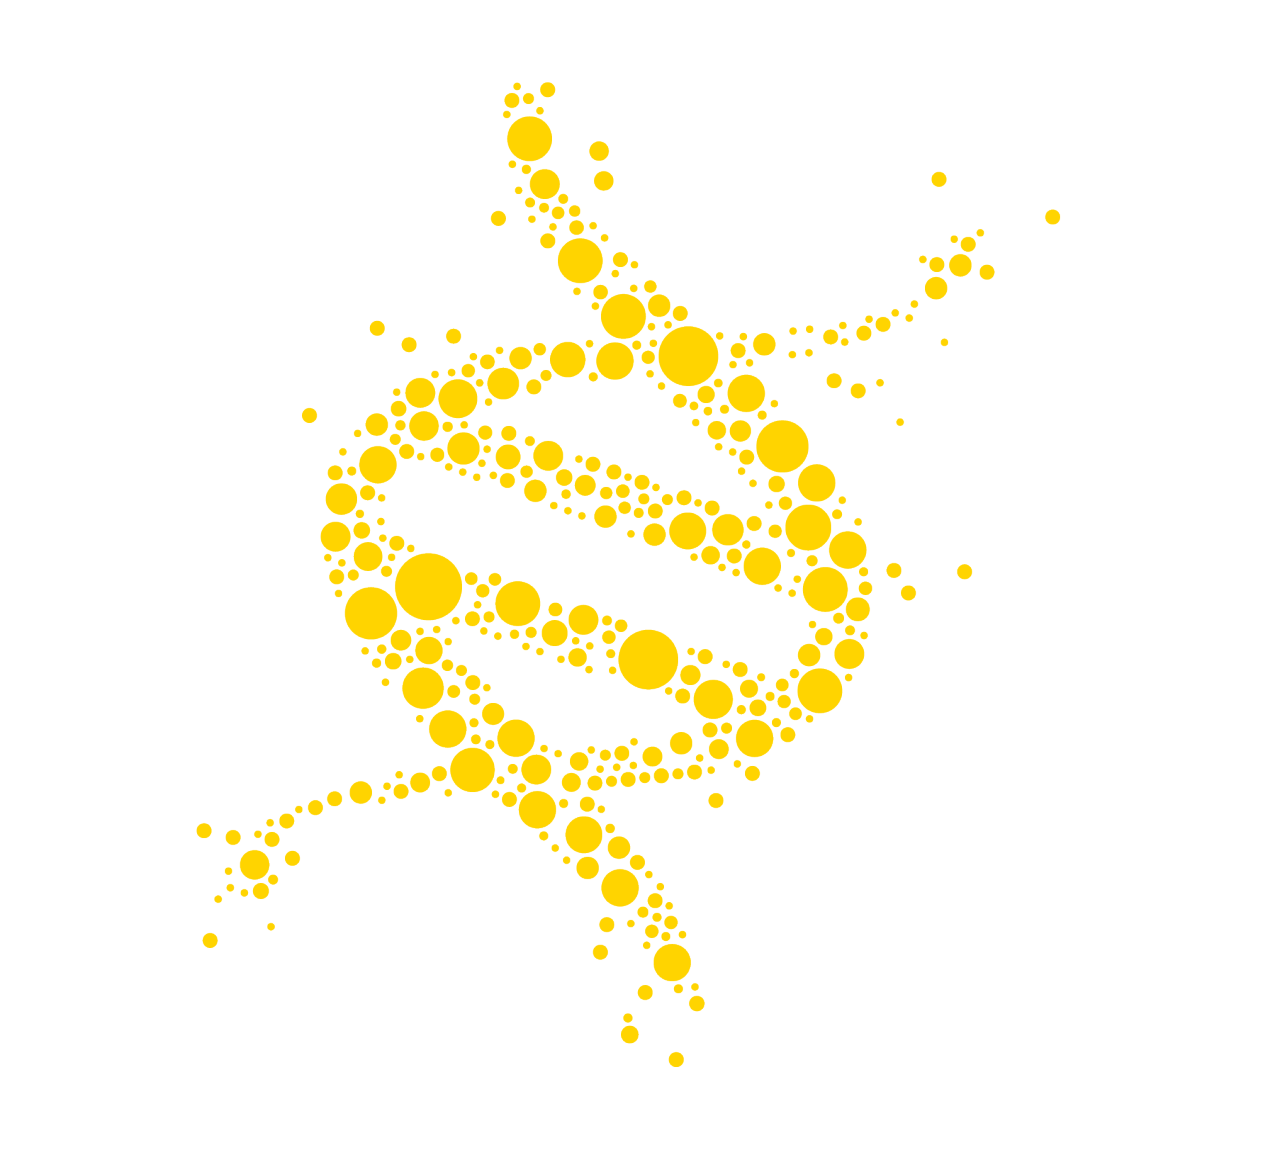 Yellow circles make up the shape of a DNA strand